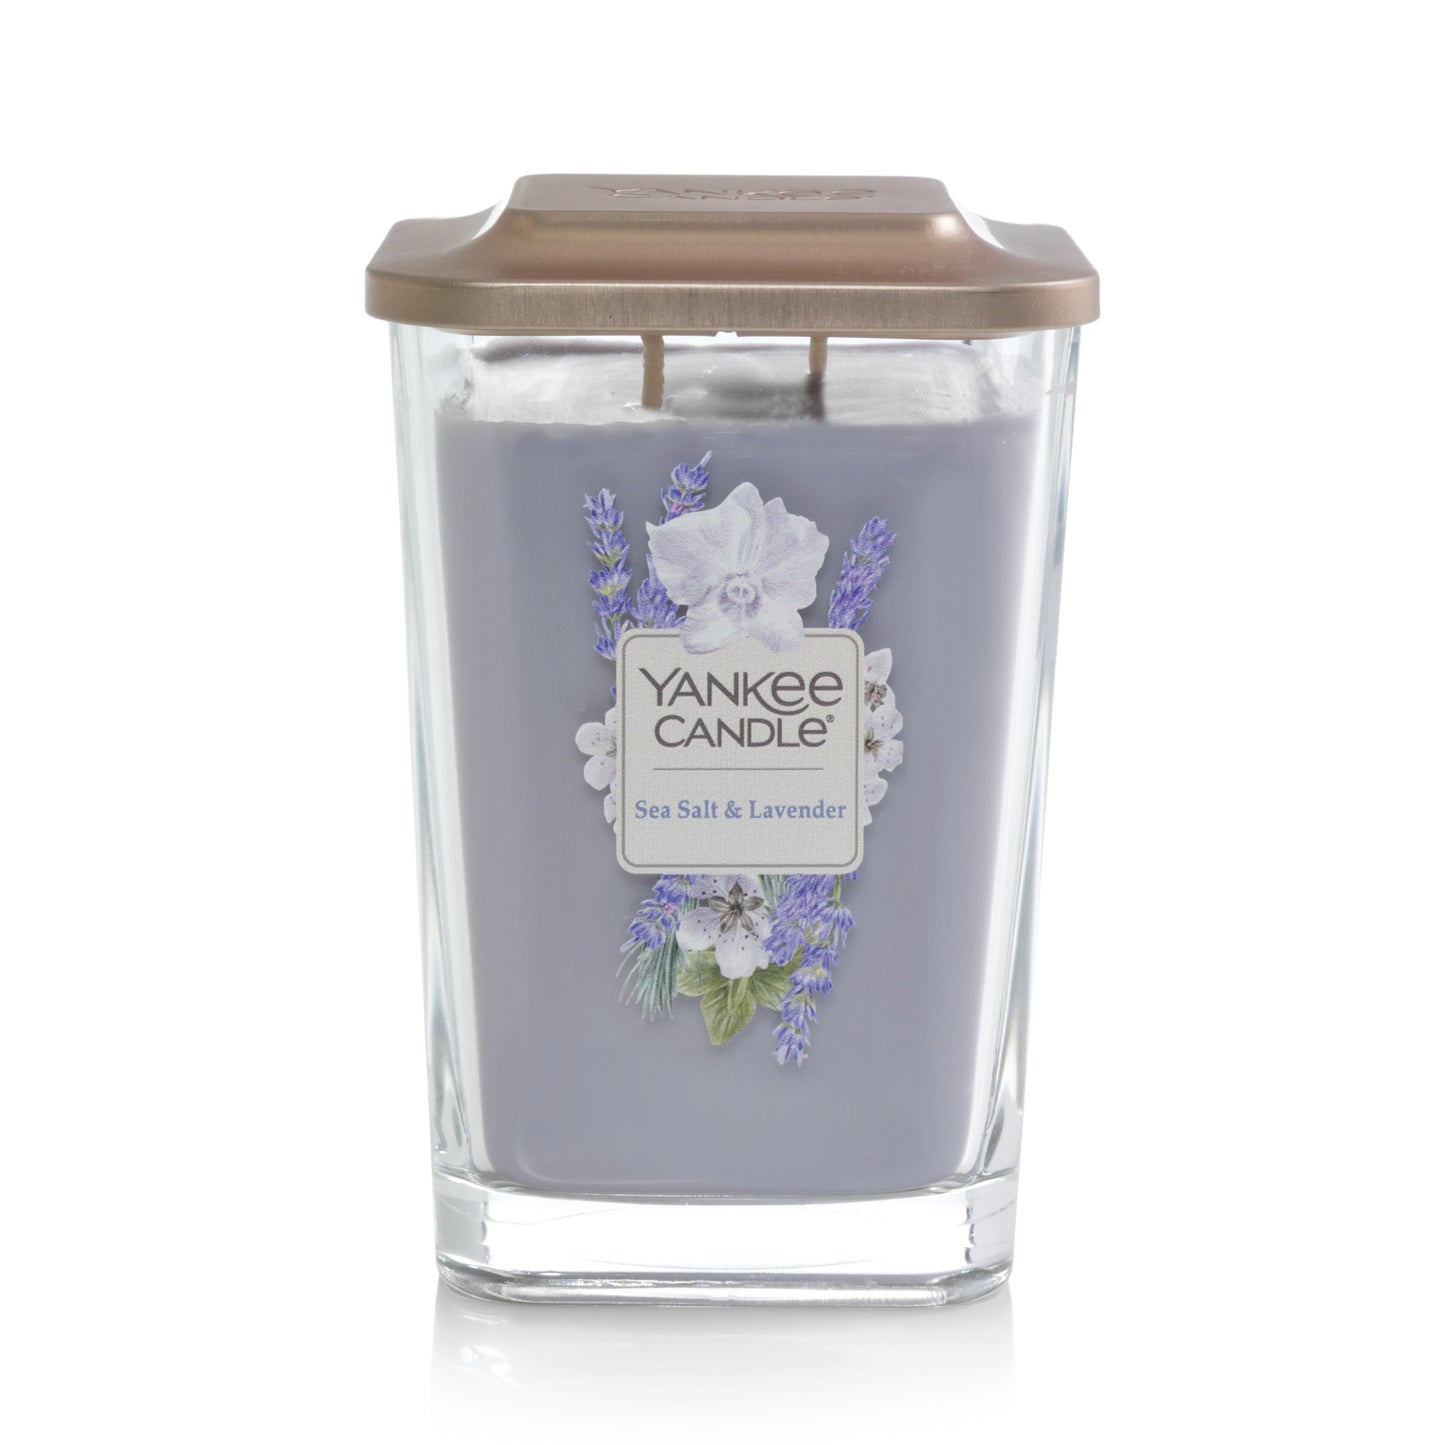 YANKEE CANDLE ELEVATION COLLECTION LARGE